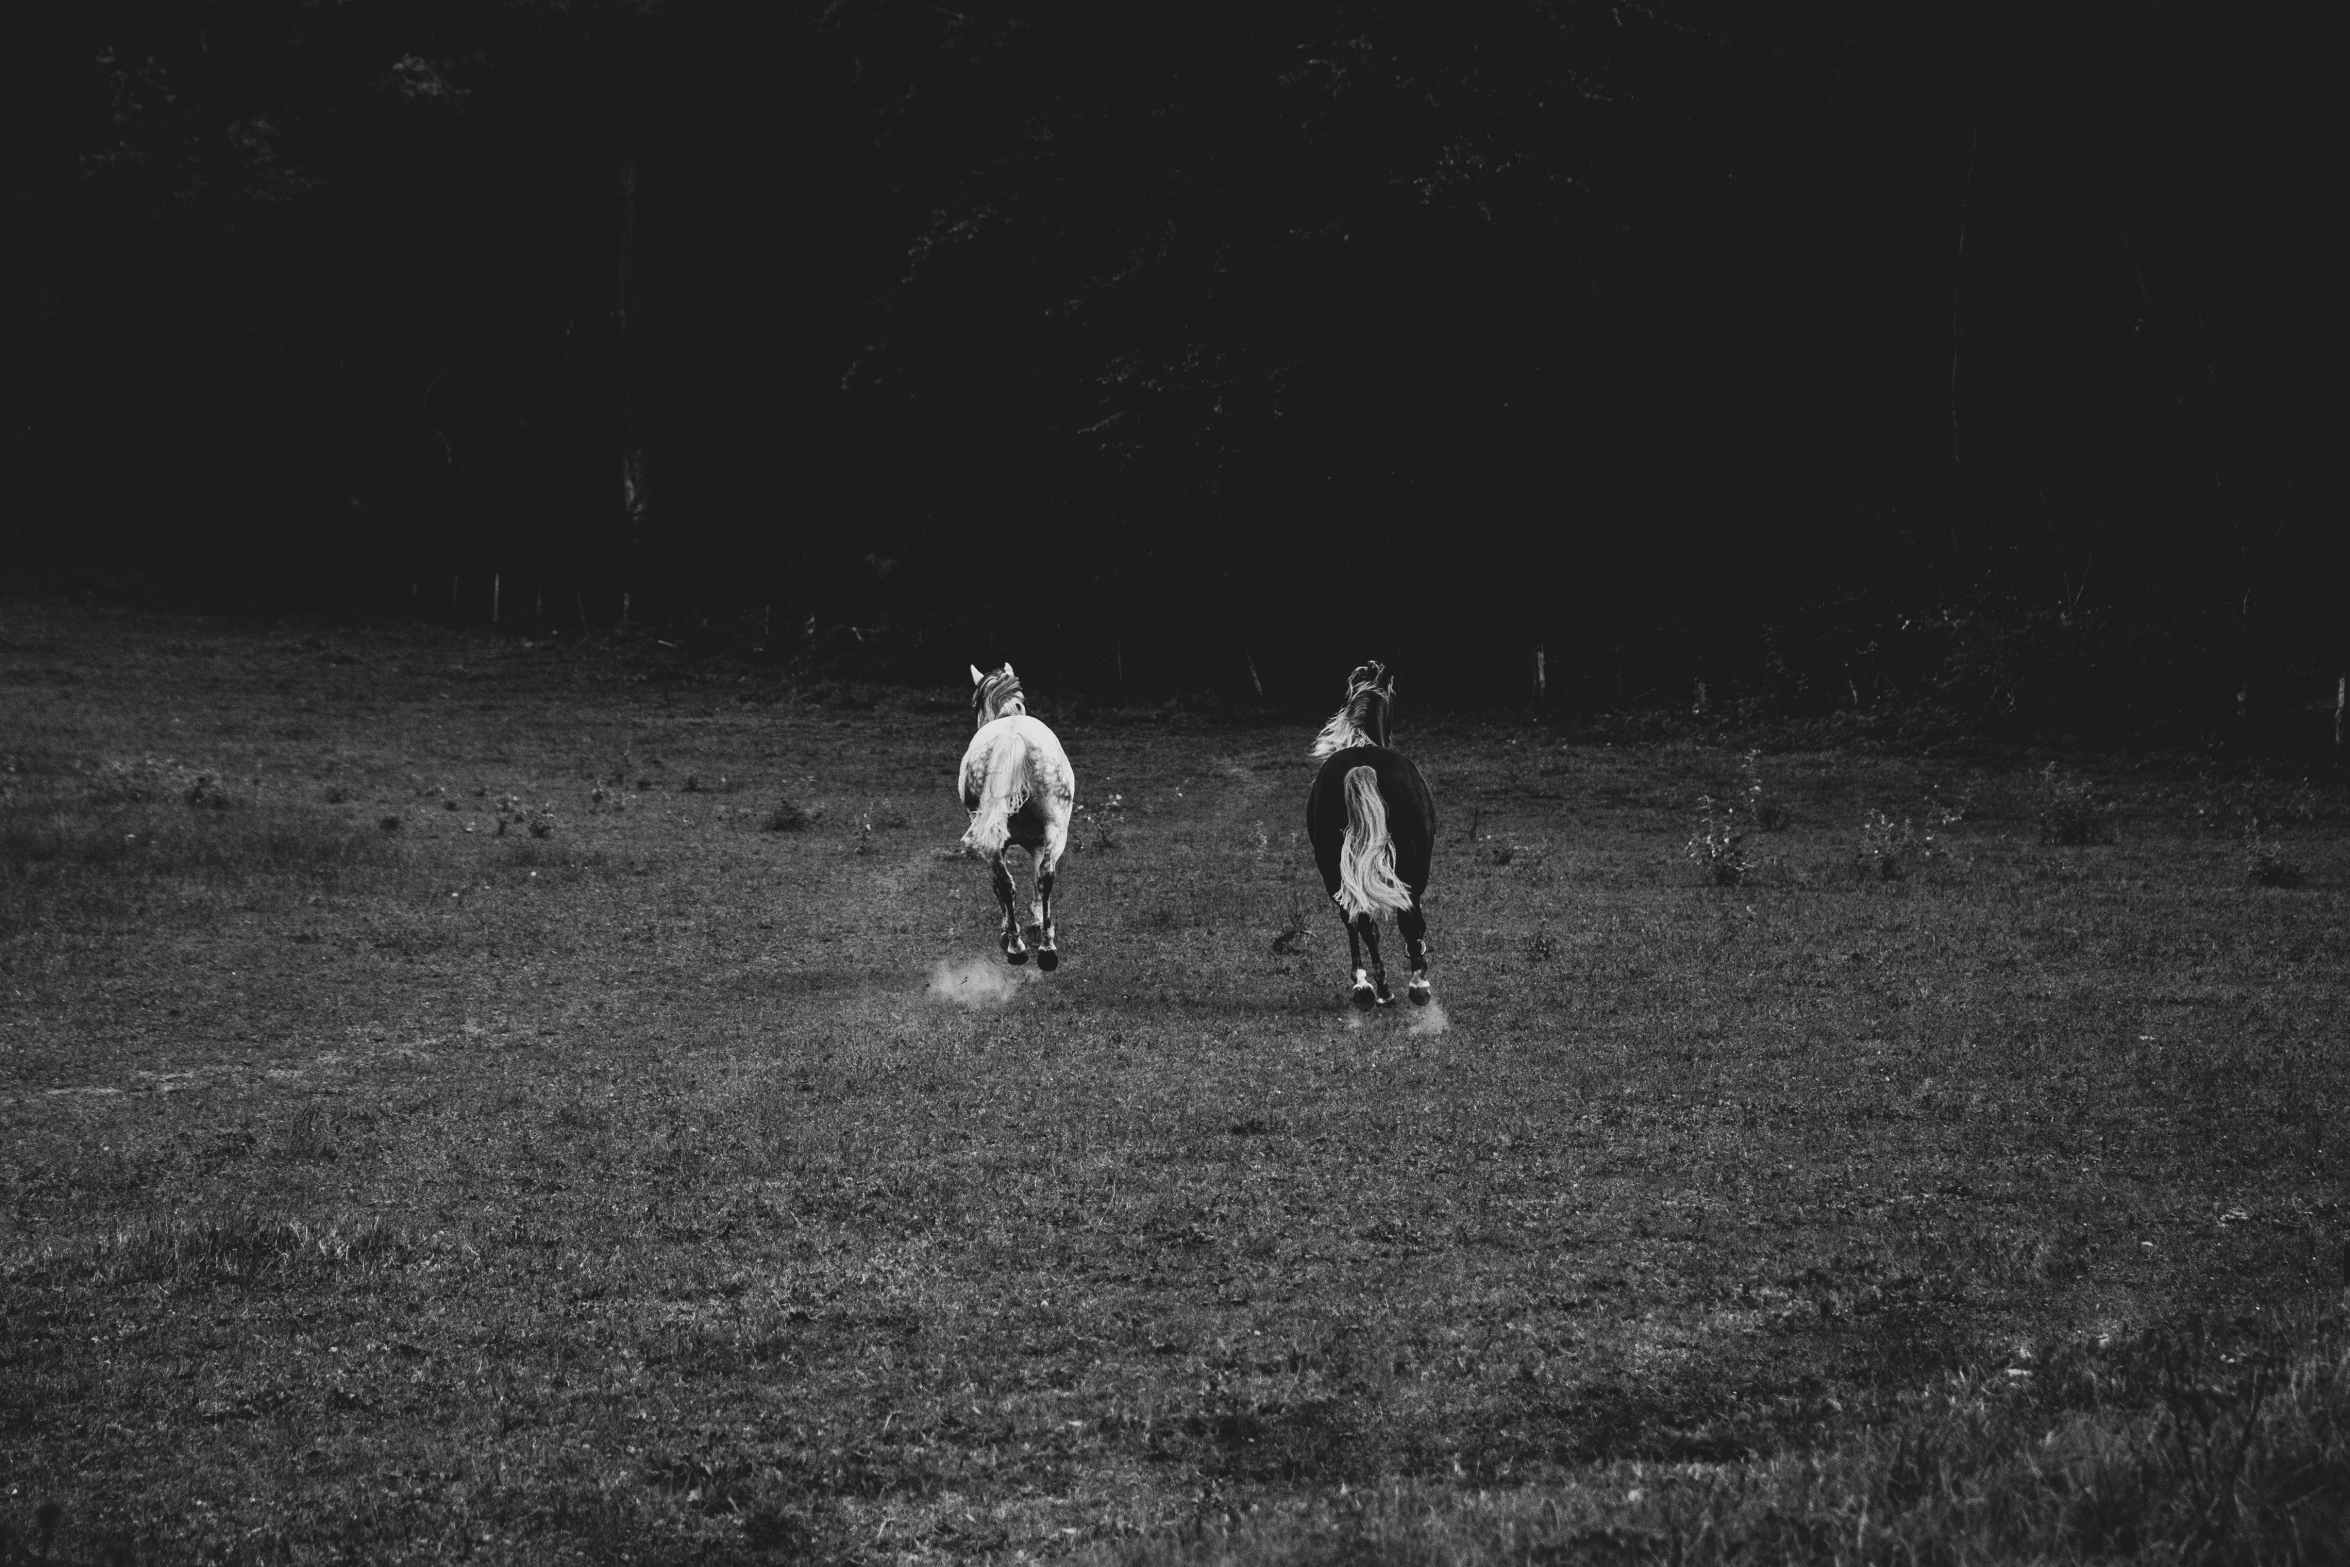 two people play with a soccer ball in a field